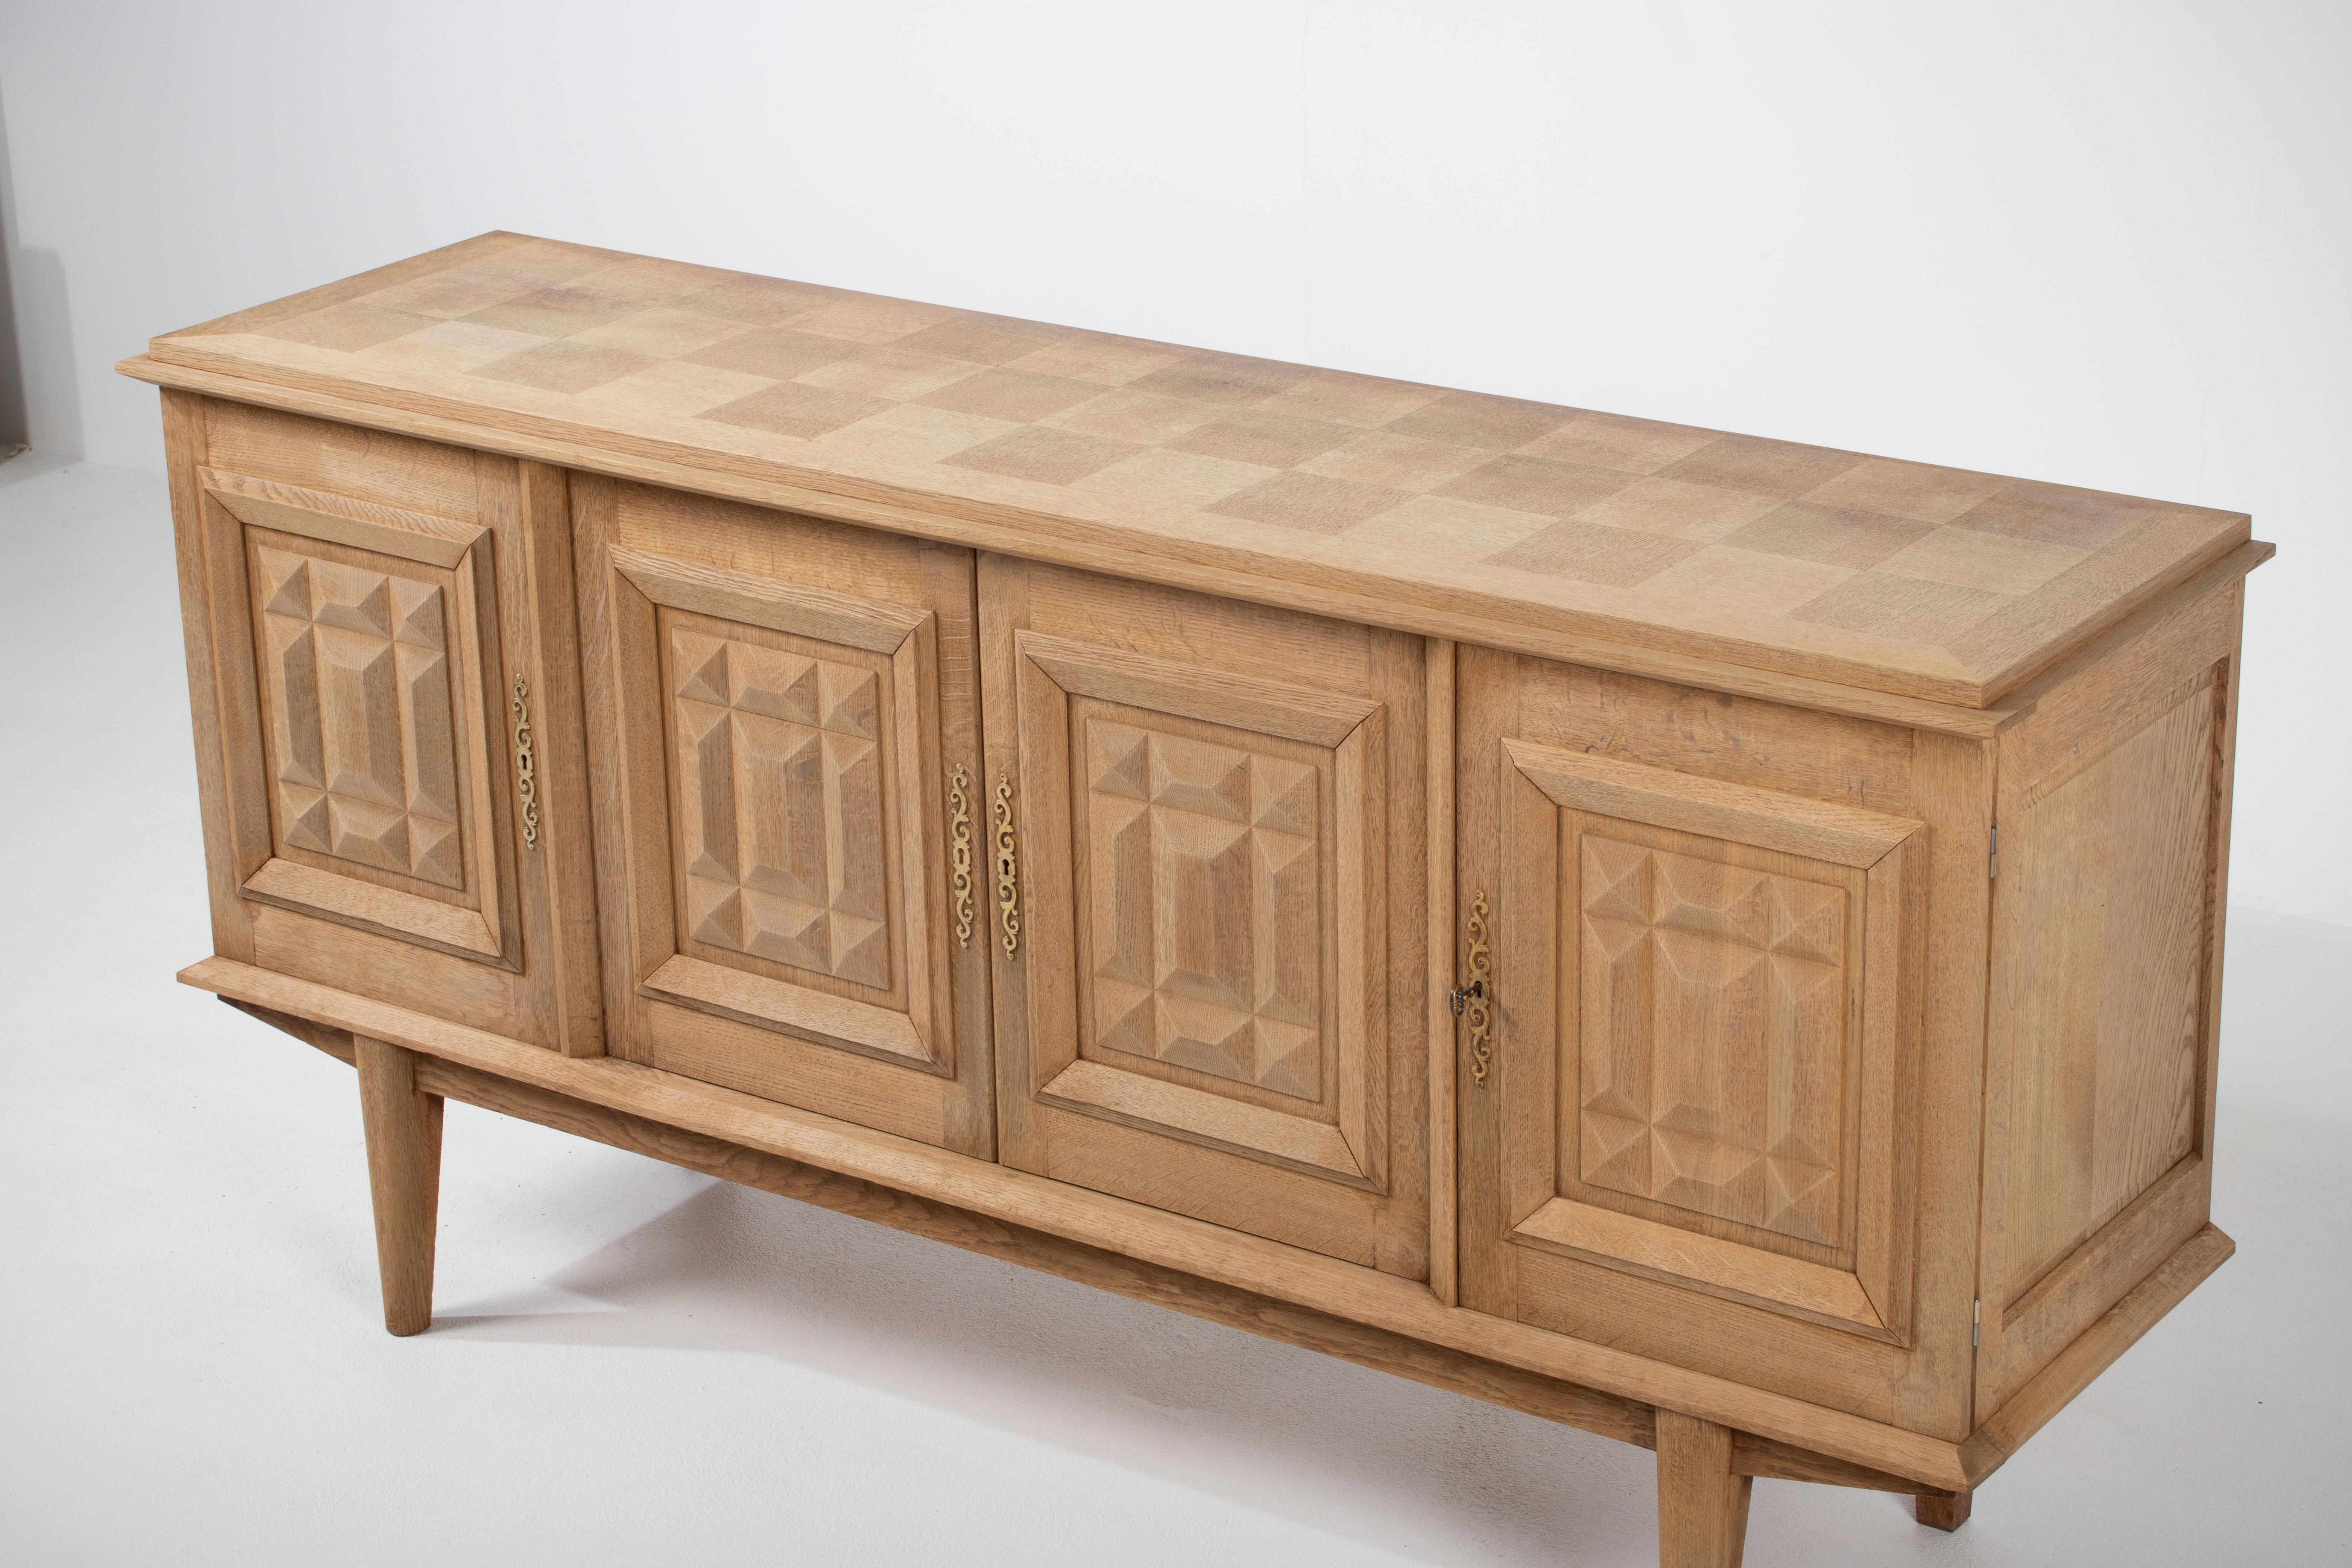 Bleached Solid Oak Credenza with Graphic Details, France, 1940s For Sale 3